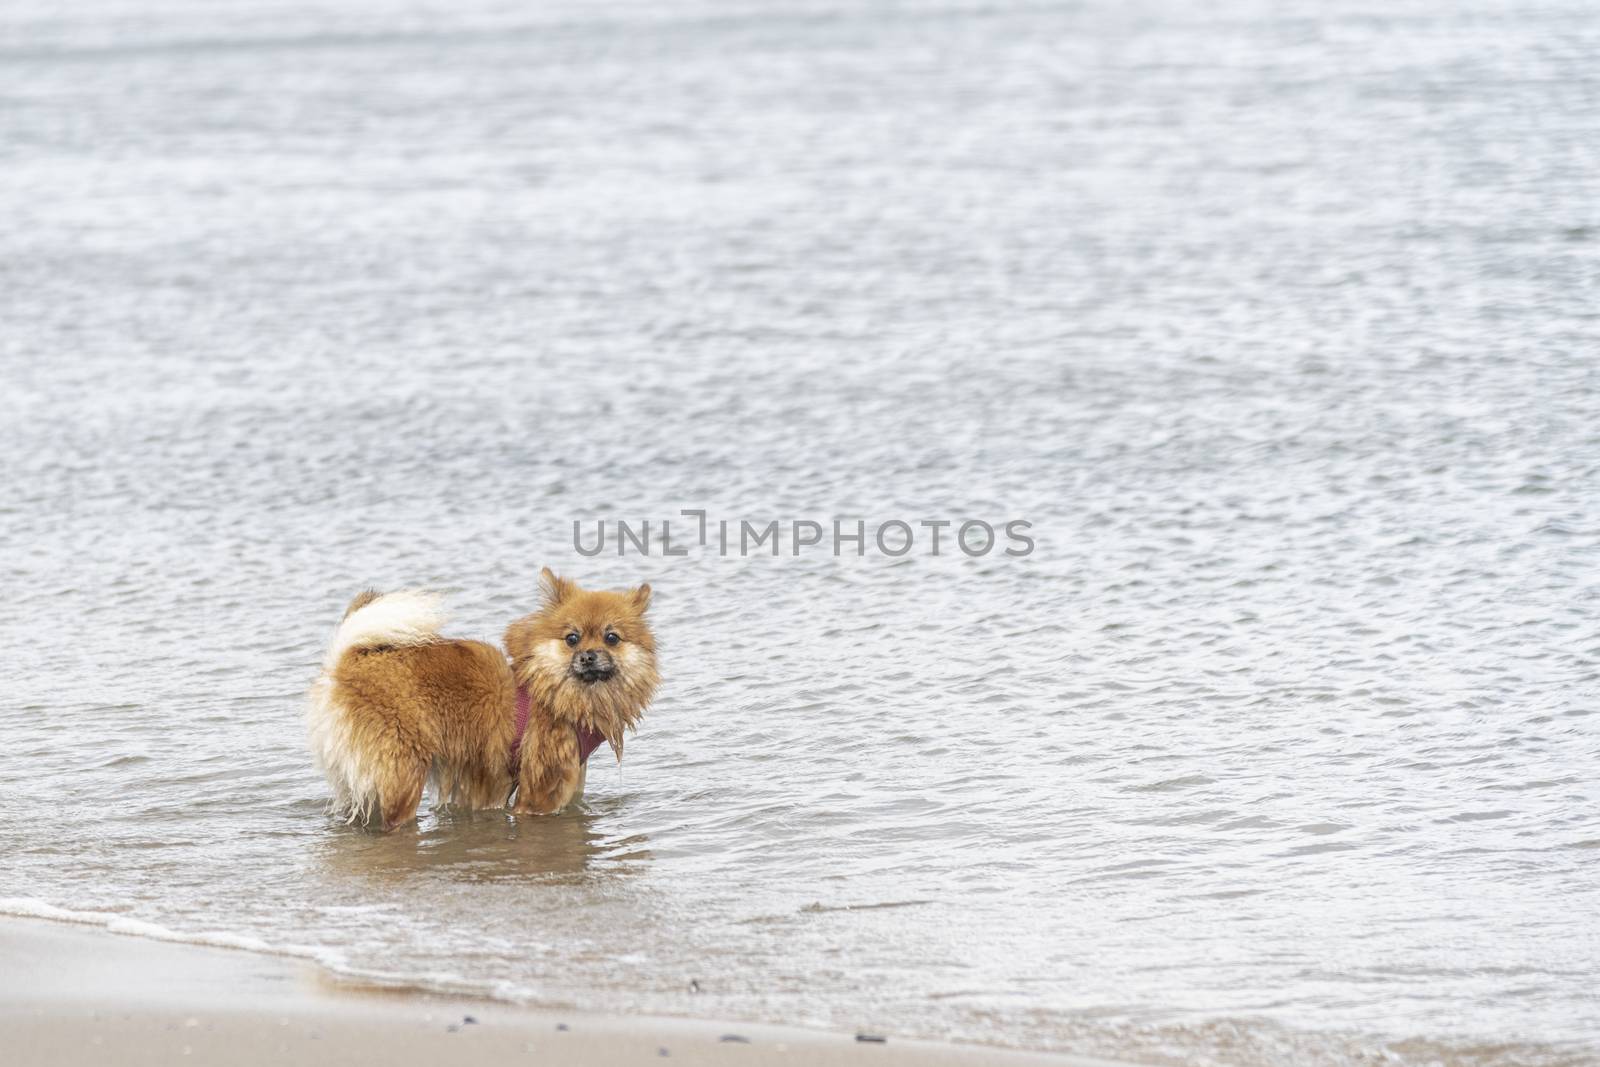 Little creamy brown fox color Norfolk Terrier dog playing with the salty sea water and running on the beach of the North Sea at Scheveningen, Netherlands